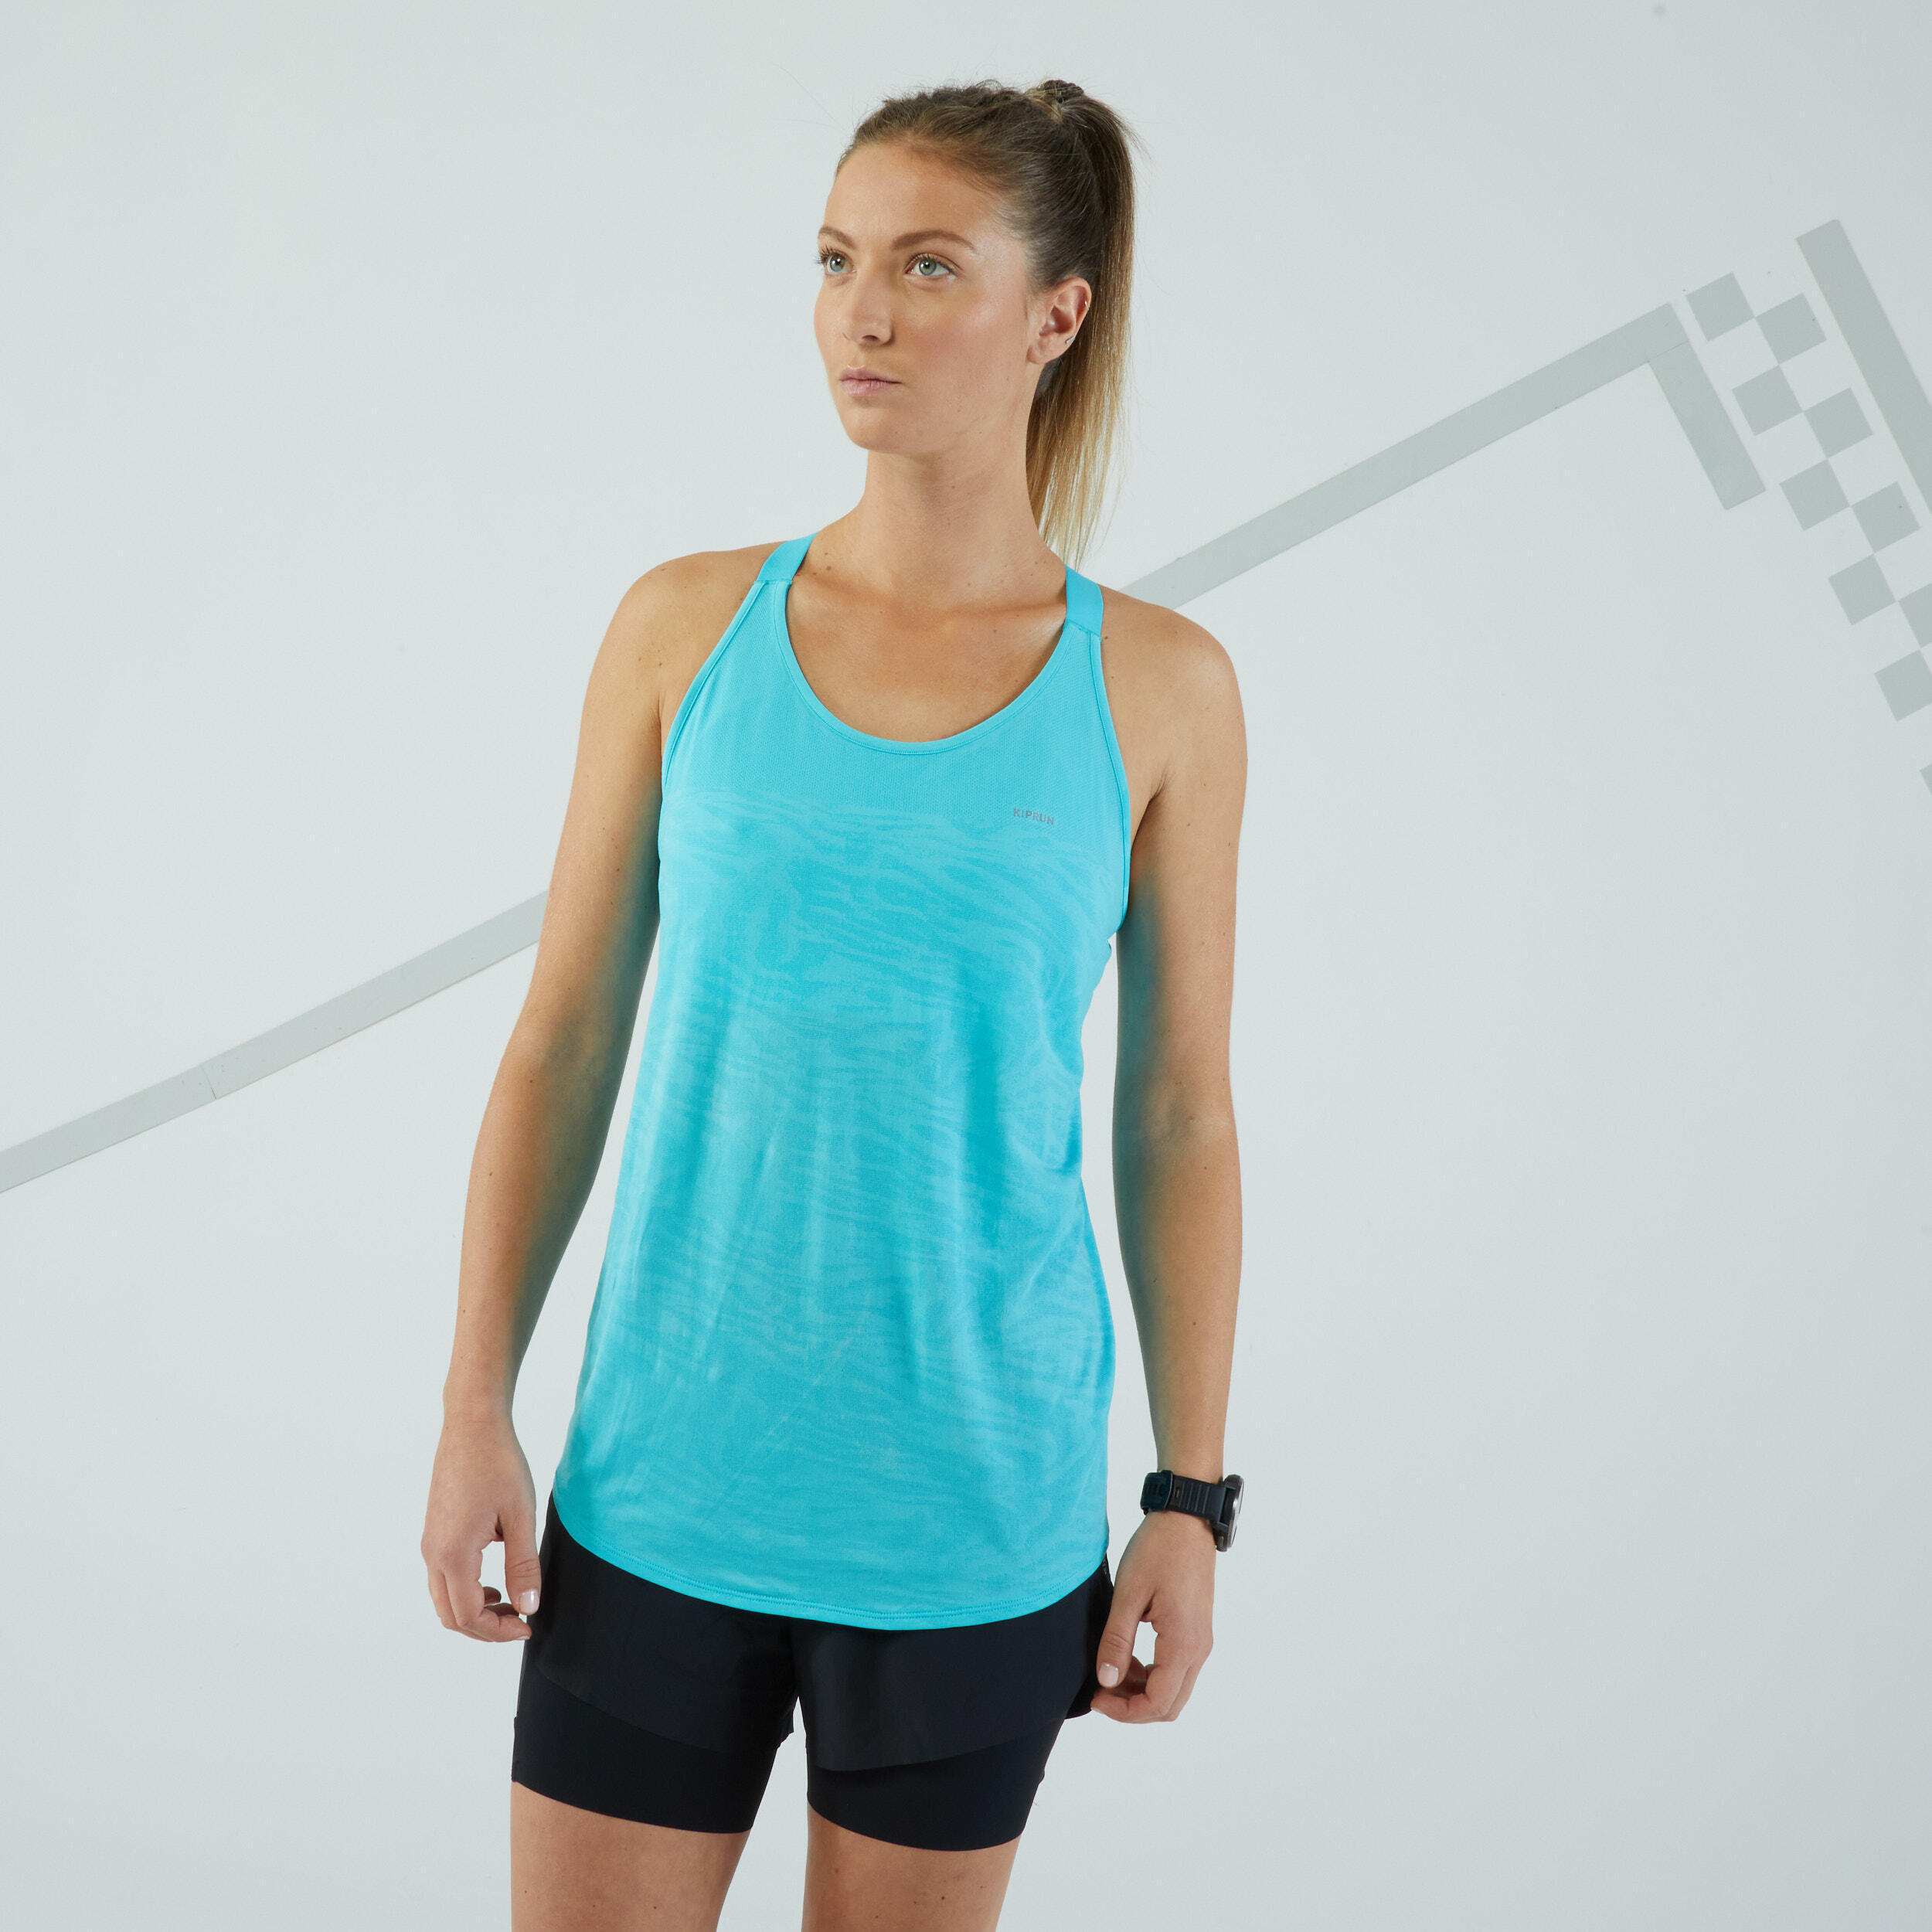 Refurbished Womens Running Tank Top with Built-in Bra - A Grade 3/7